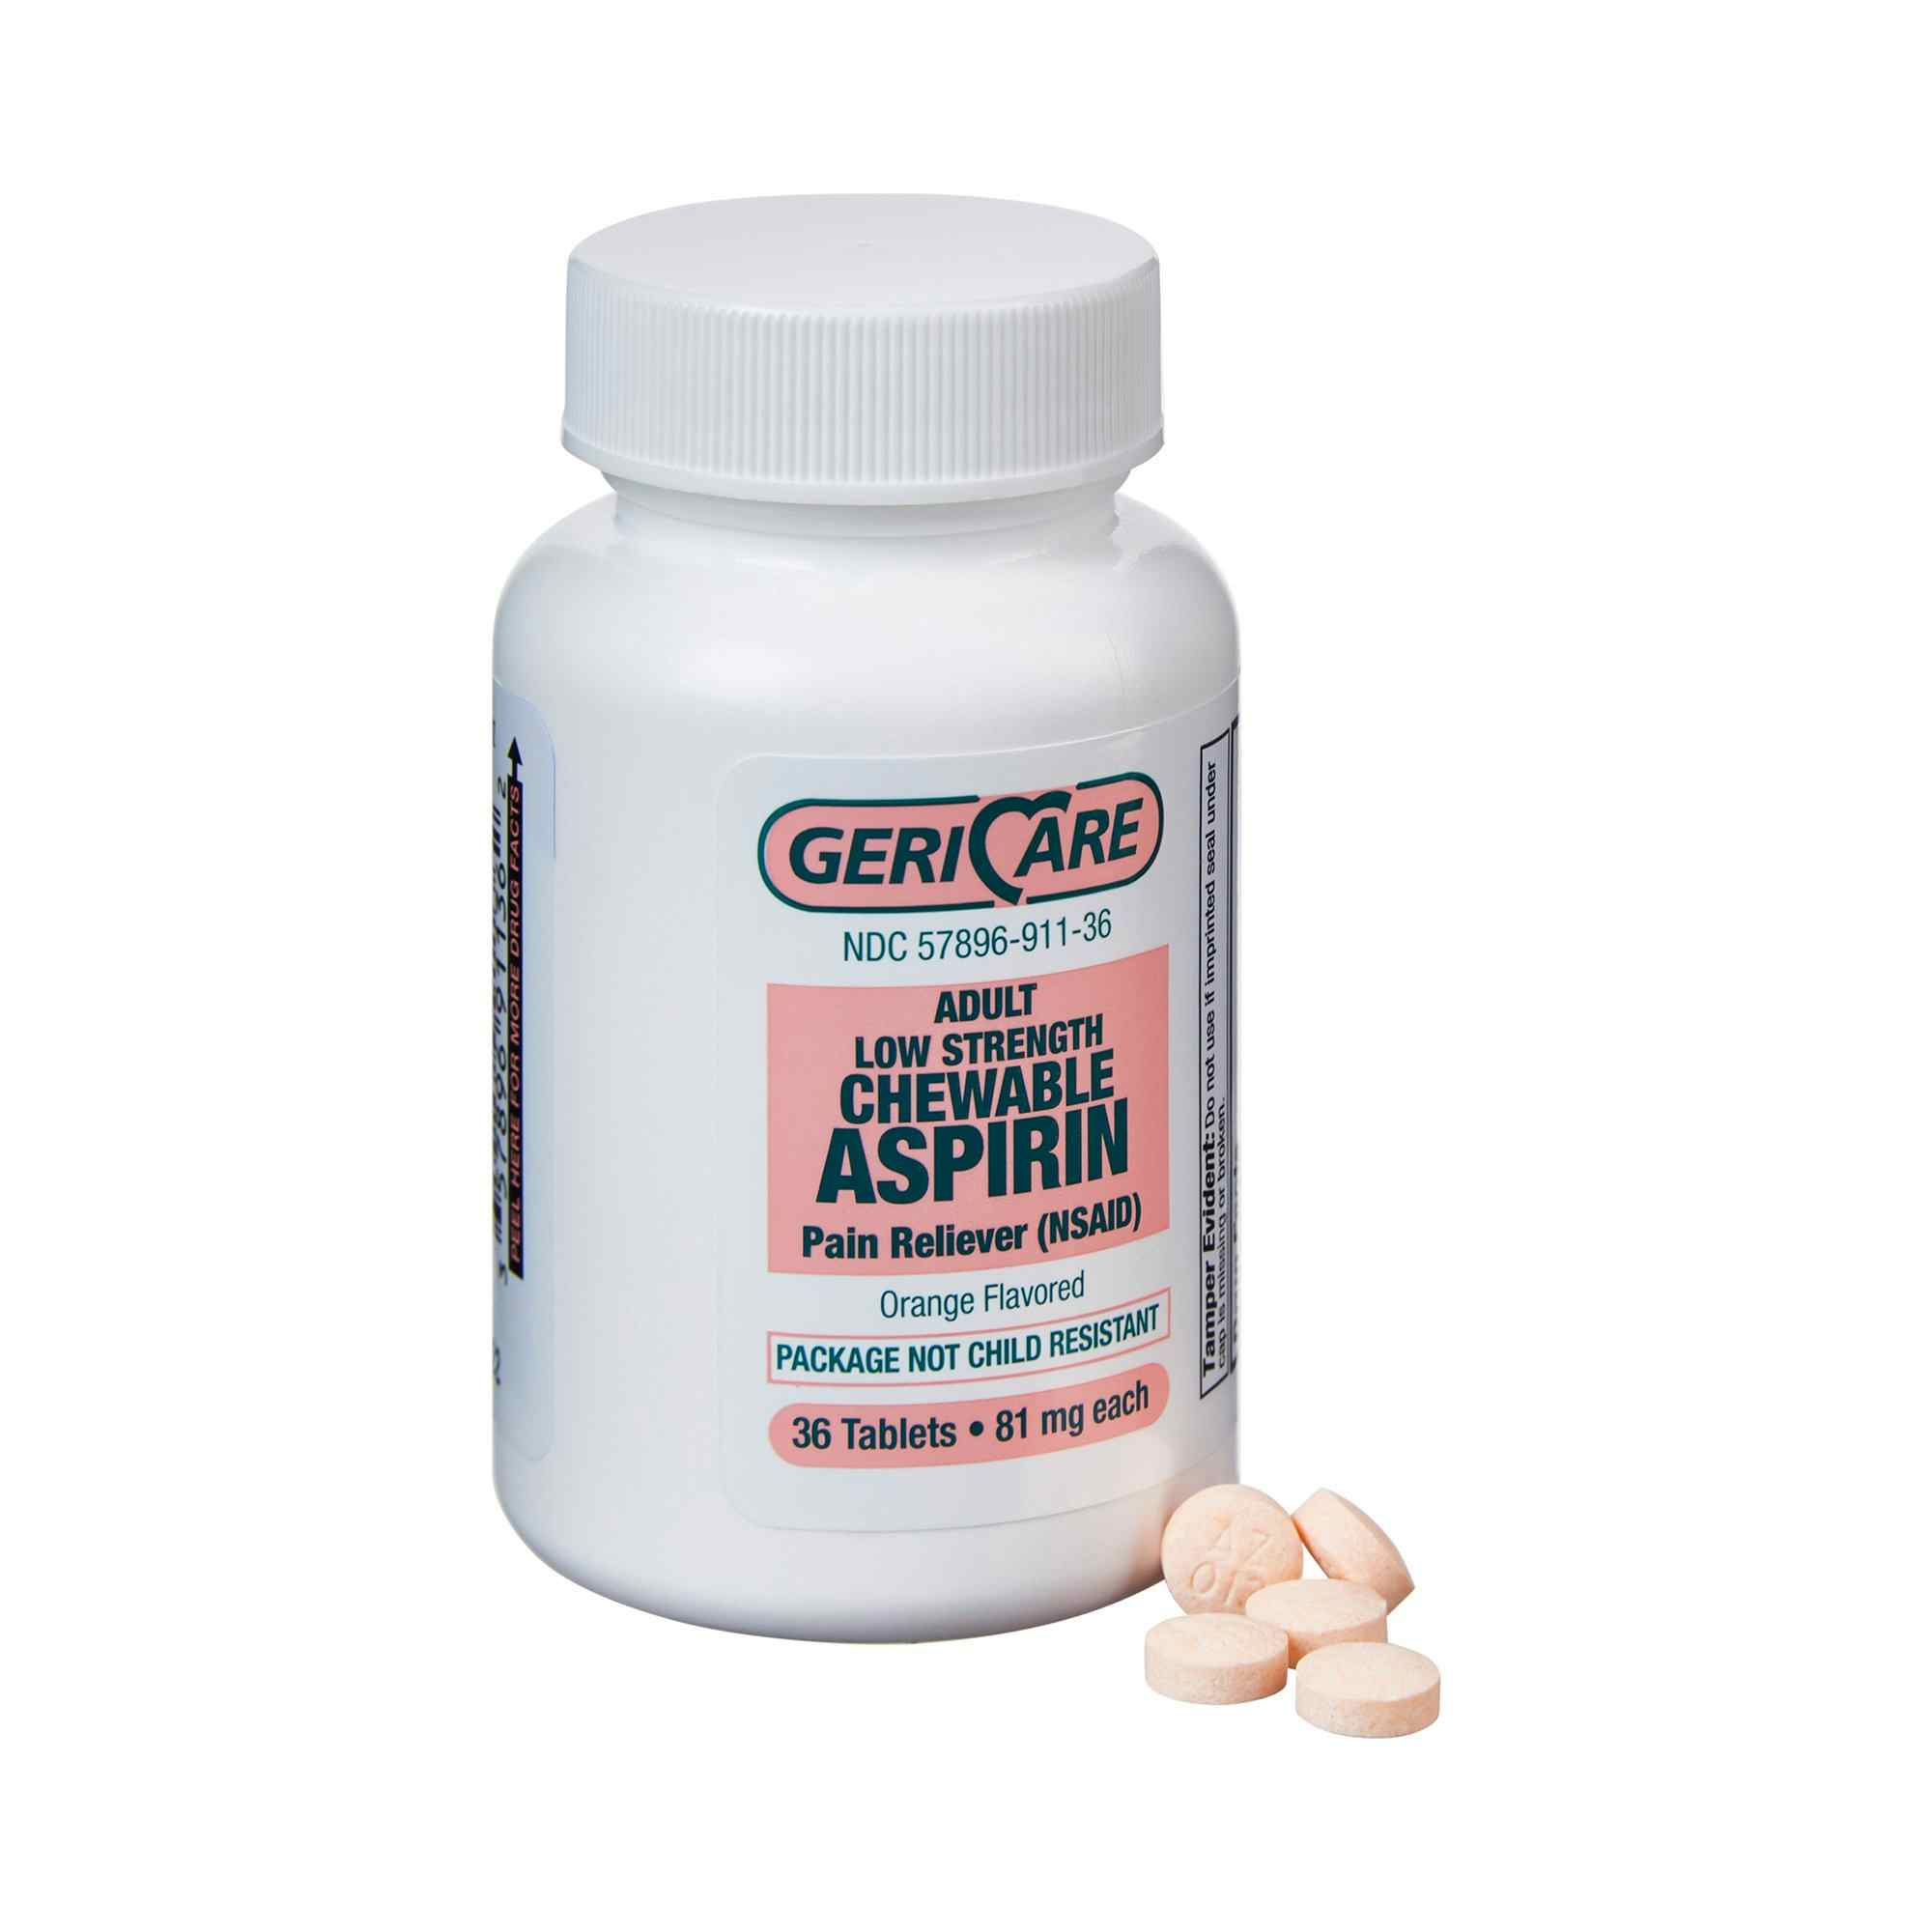 Geri-Care Adult Low Strength Chewable Aspirin Pain Reliever, 81 mg.